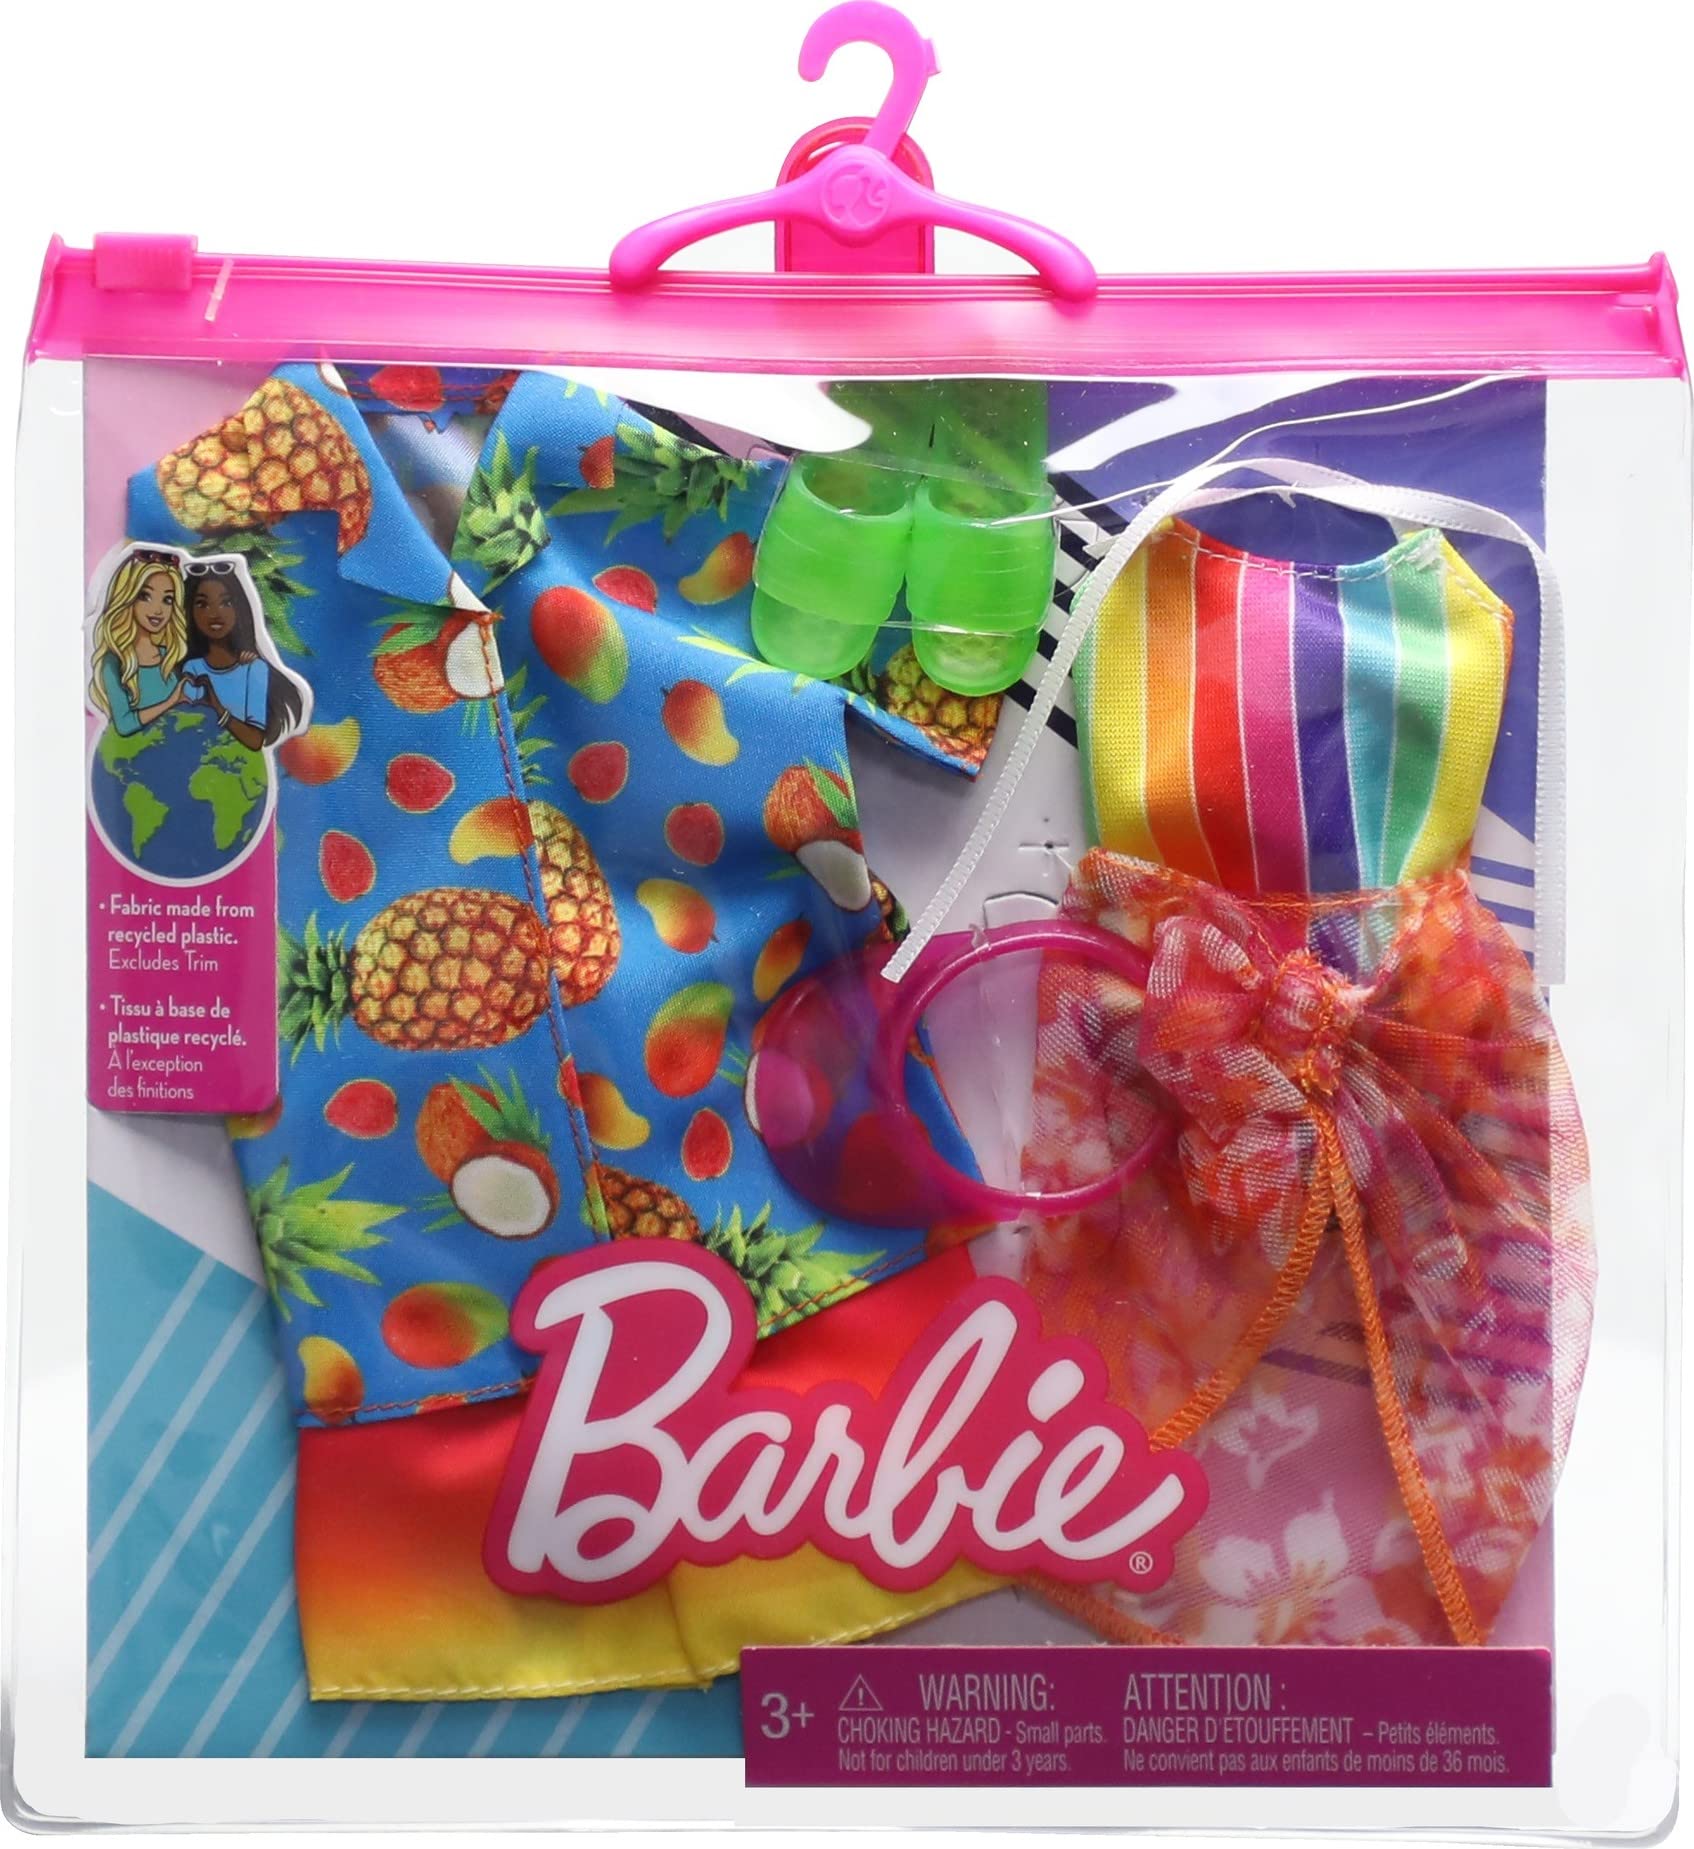 Barbie Fashions Doll Clothes and Accessories Set, Beach 2-Pack for Barbie and Ken Dolls with 2 Complete Swim Outfits